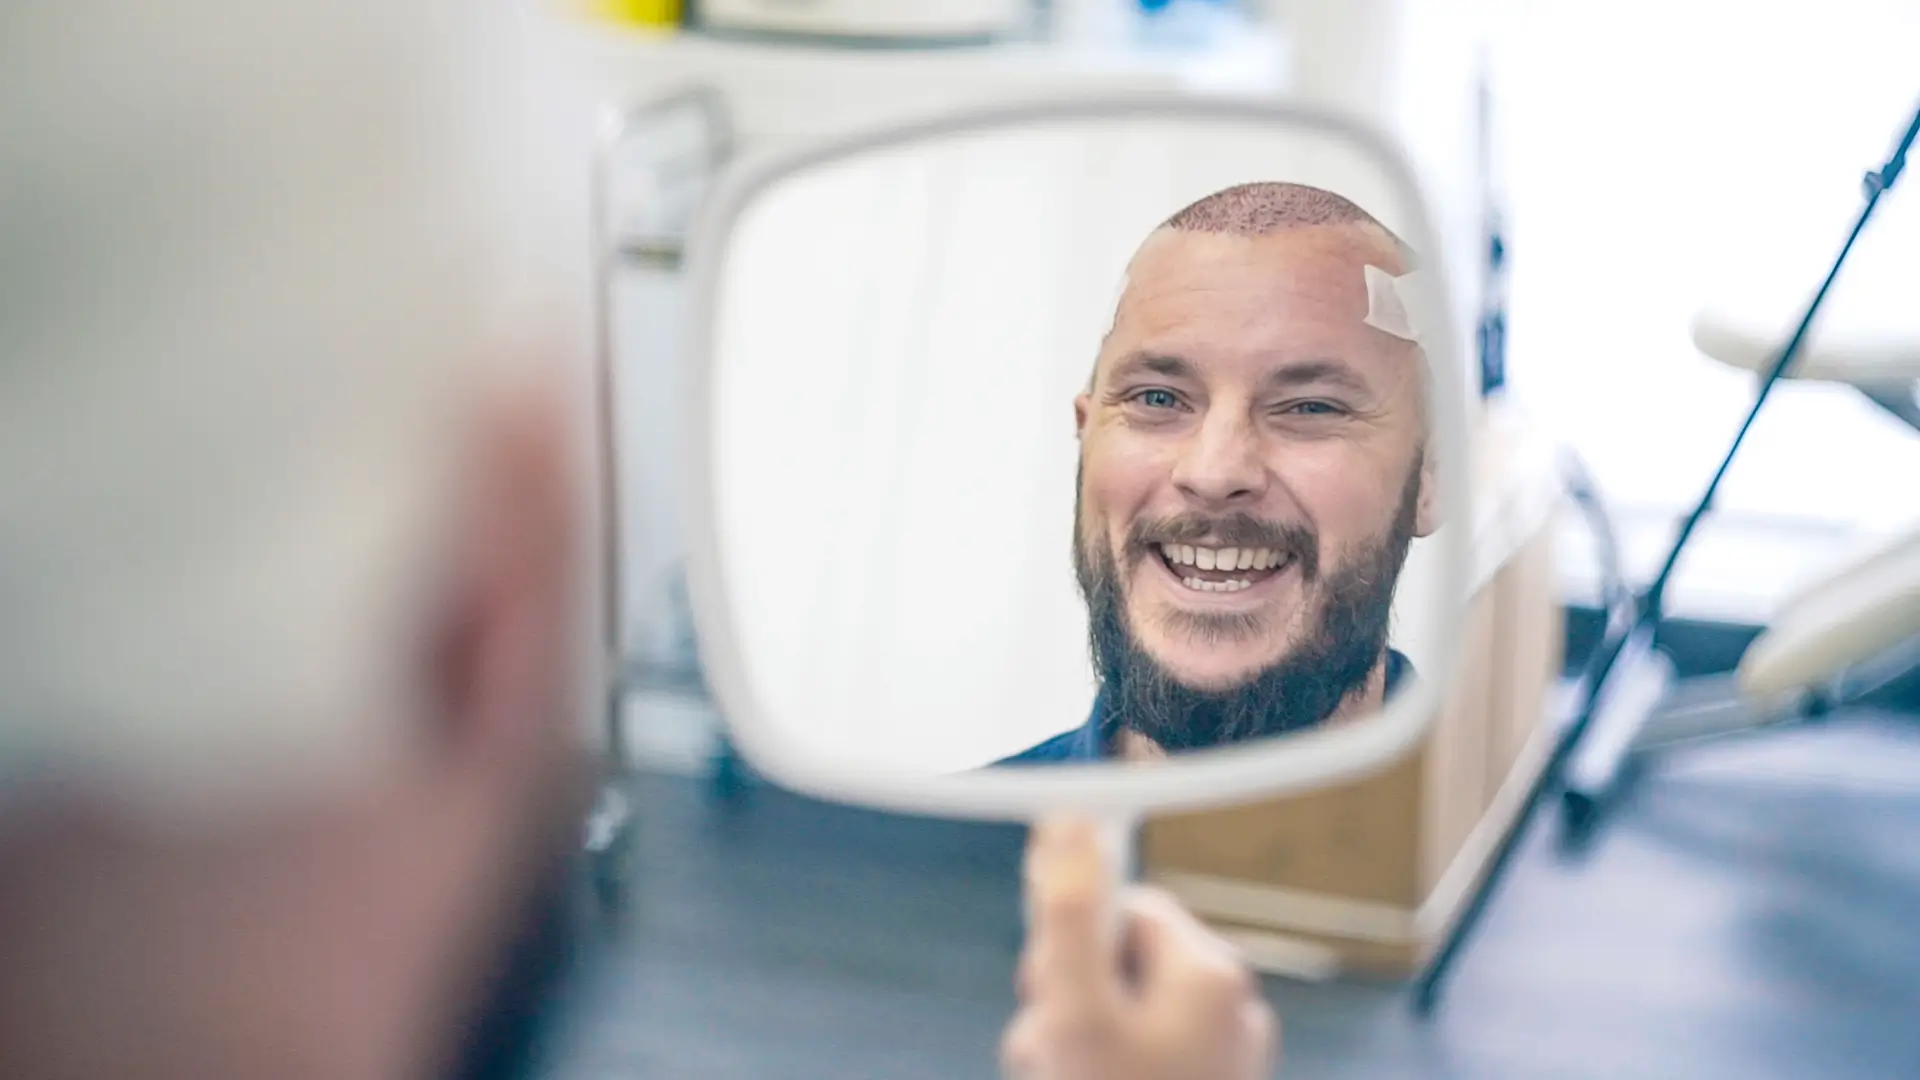 A smiling bald man with a beard observing his hair regrowth in a handheld mirror in a bright, modern room, possibly a barbershop or salon.